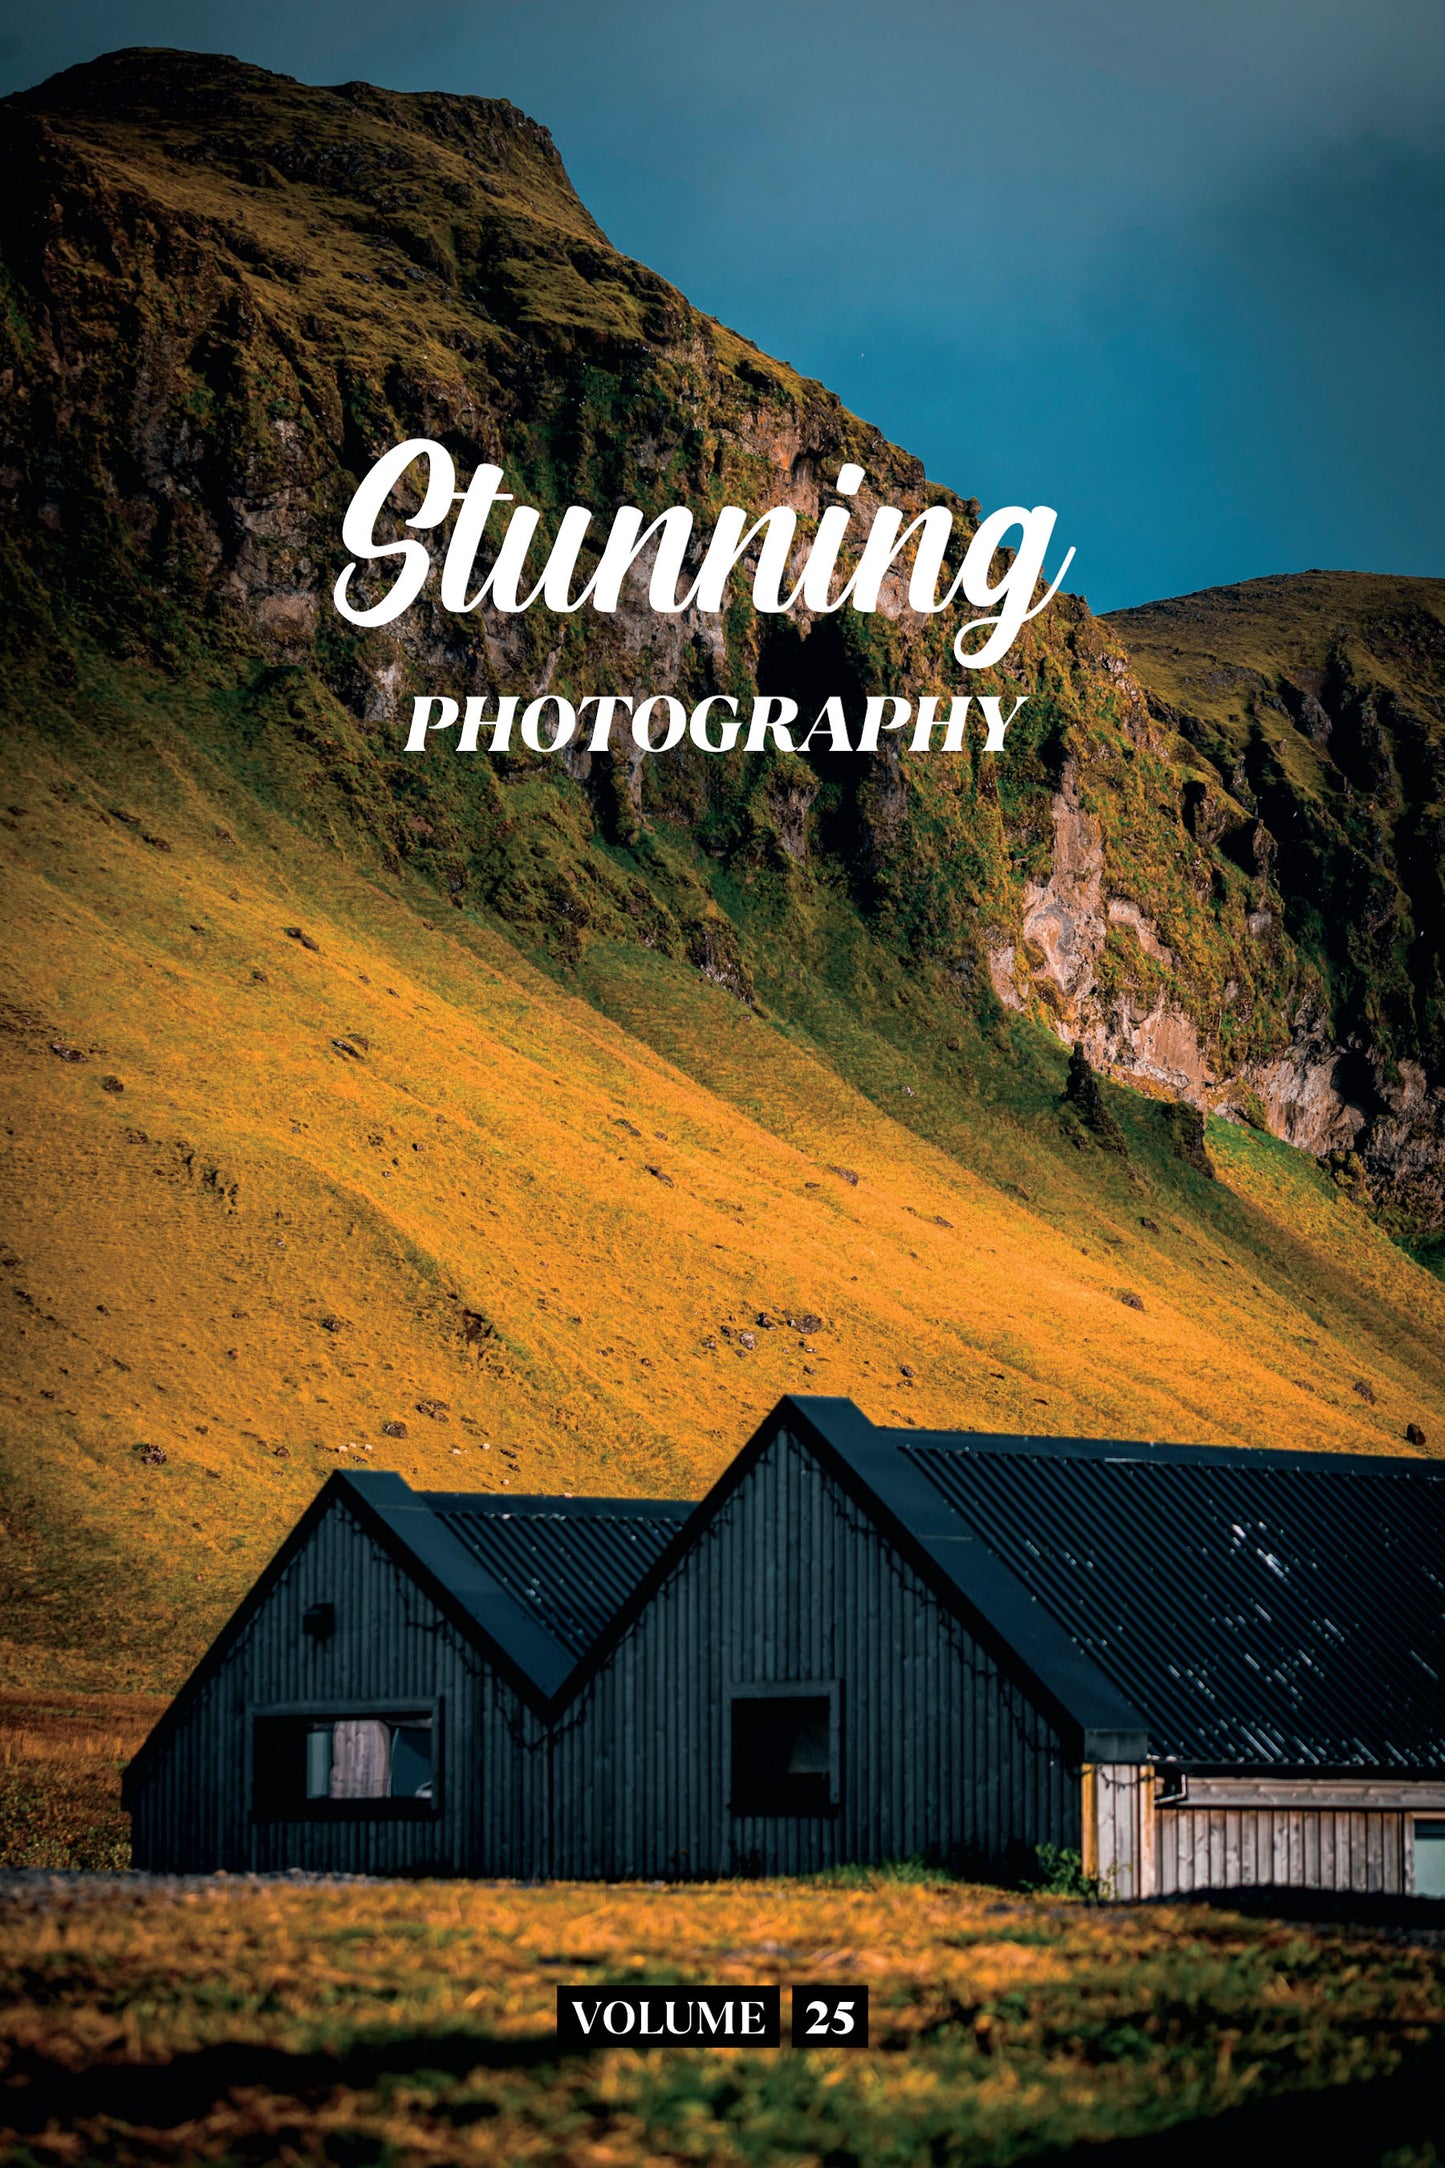 Stunning Photography Volume 25 (Physical Book Pre-Order)